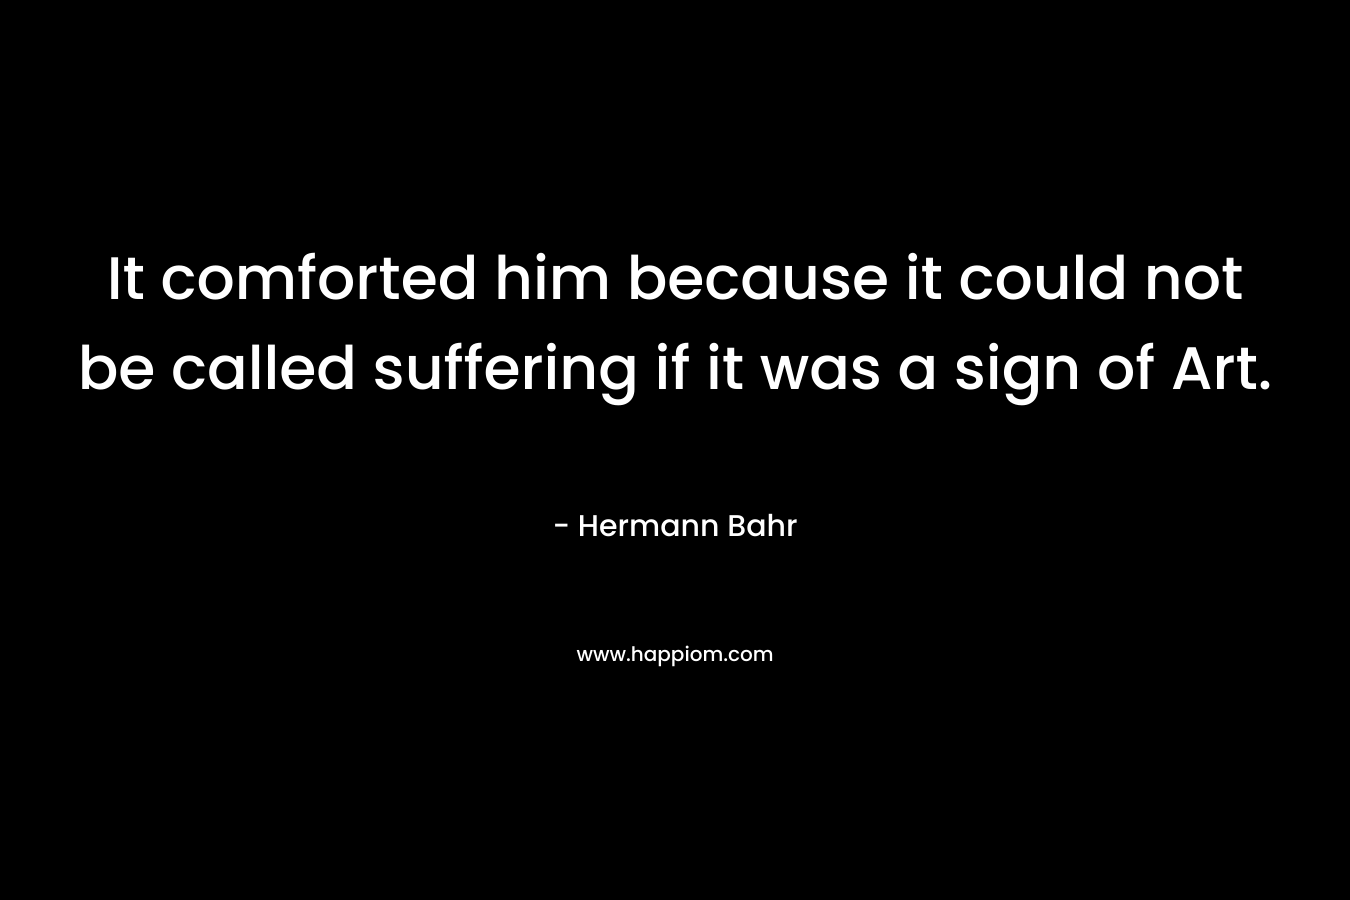 It comforted him because it could not be called suffering if it was a sign of Art.